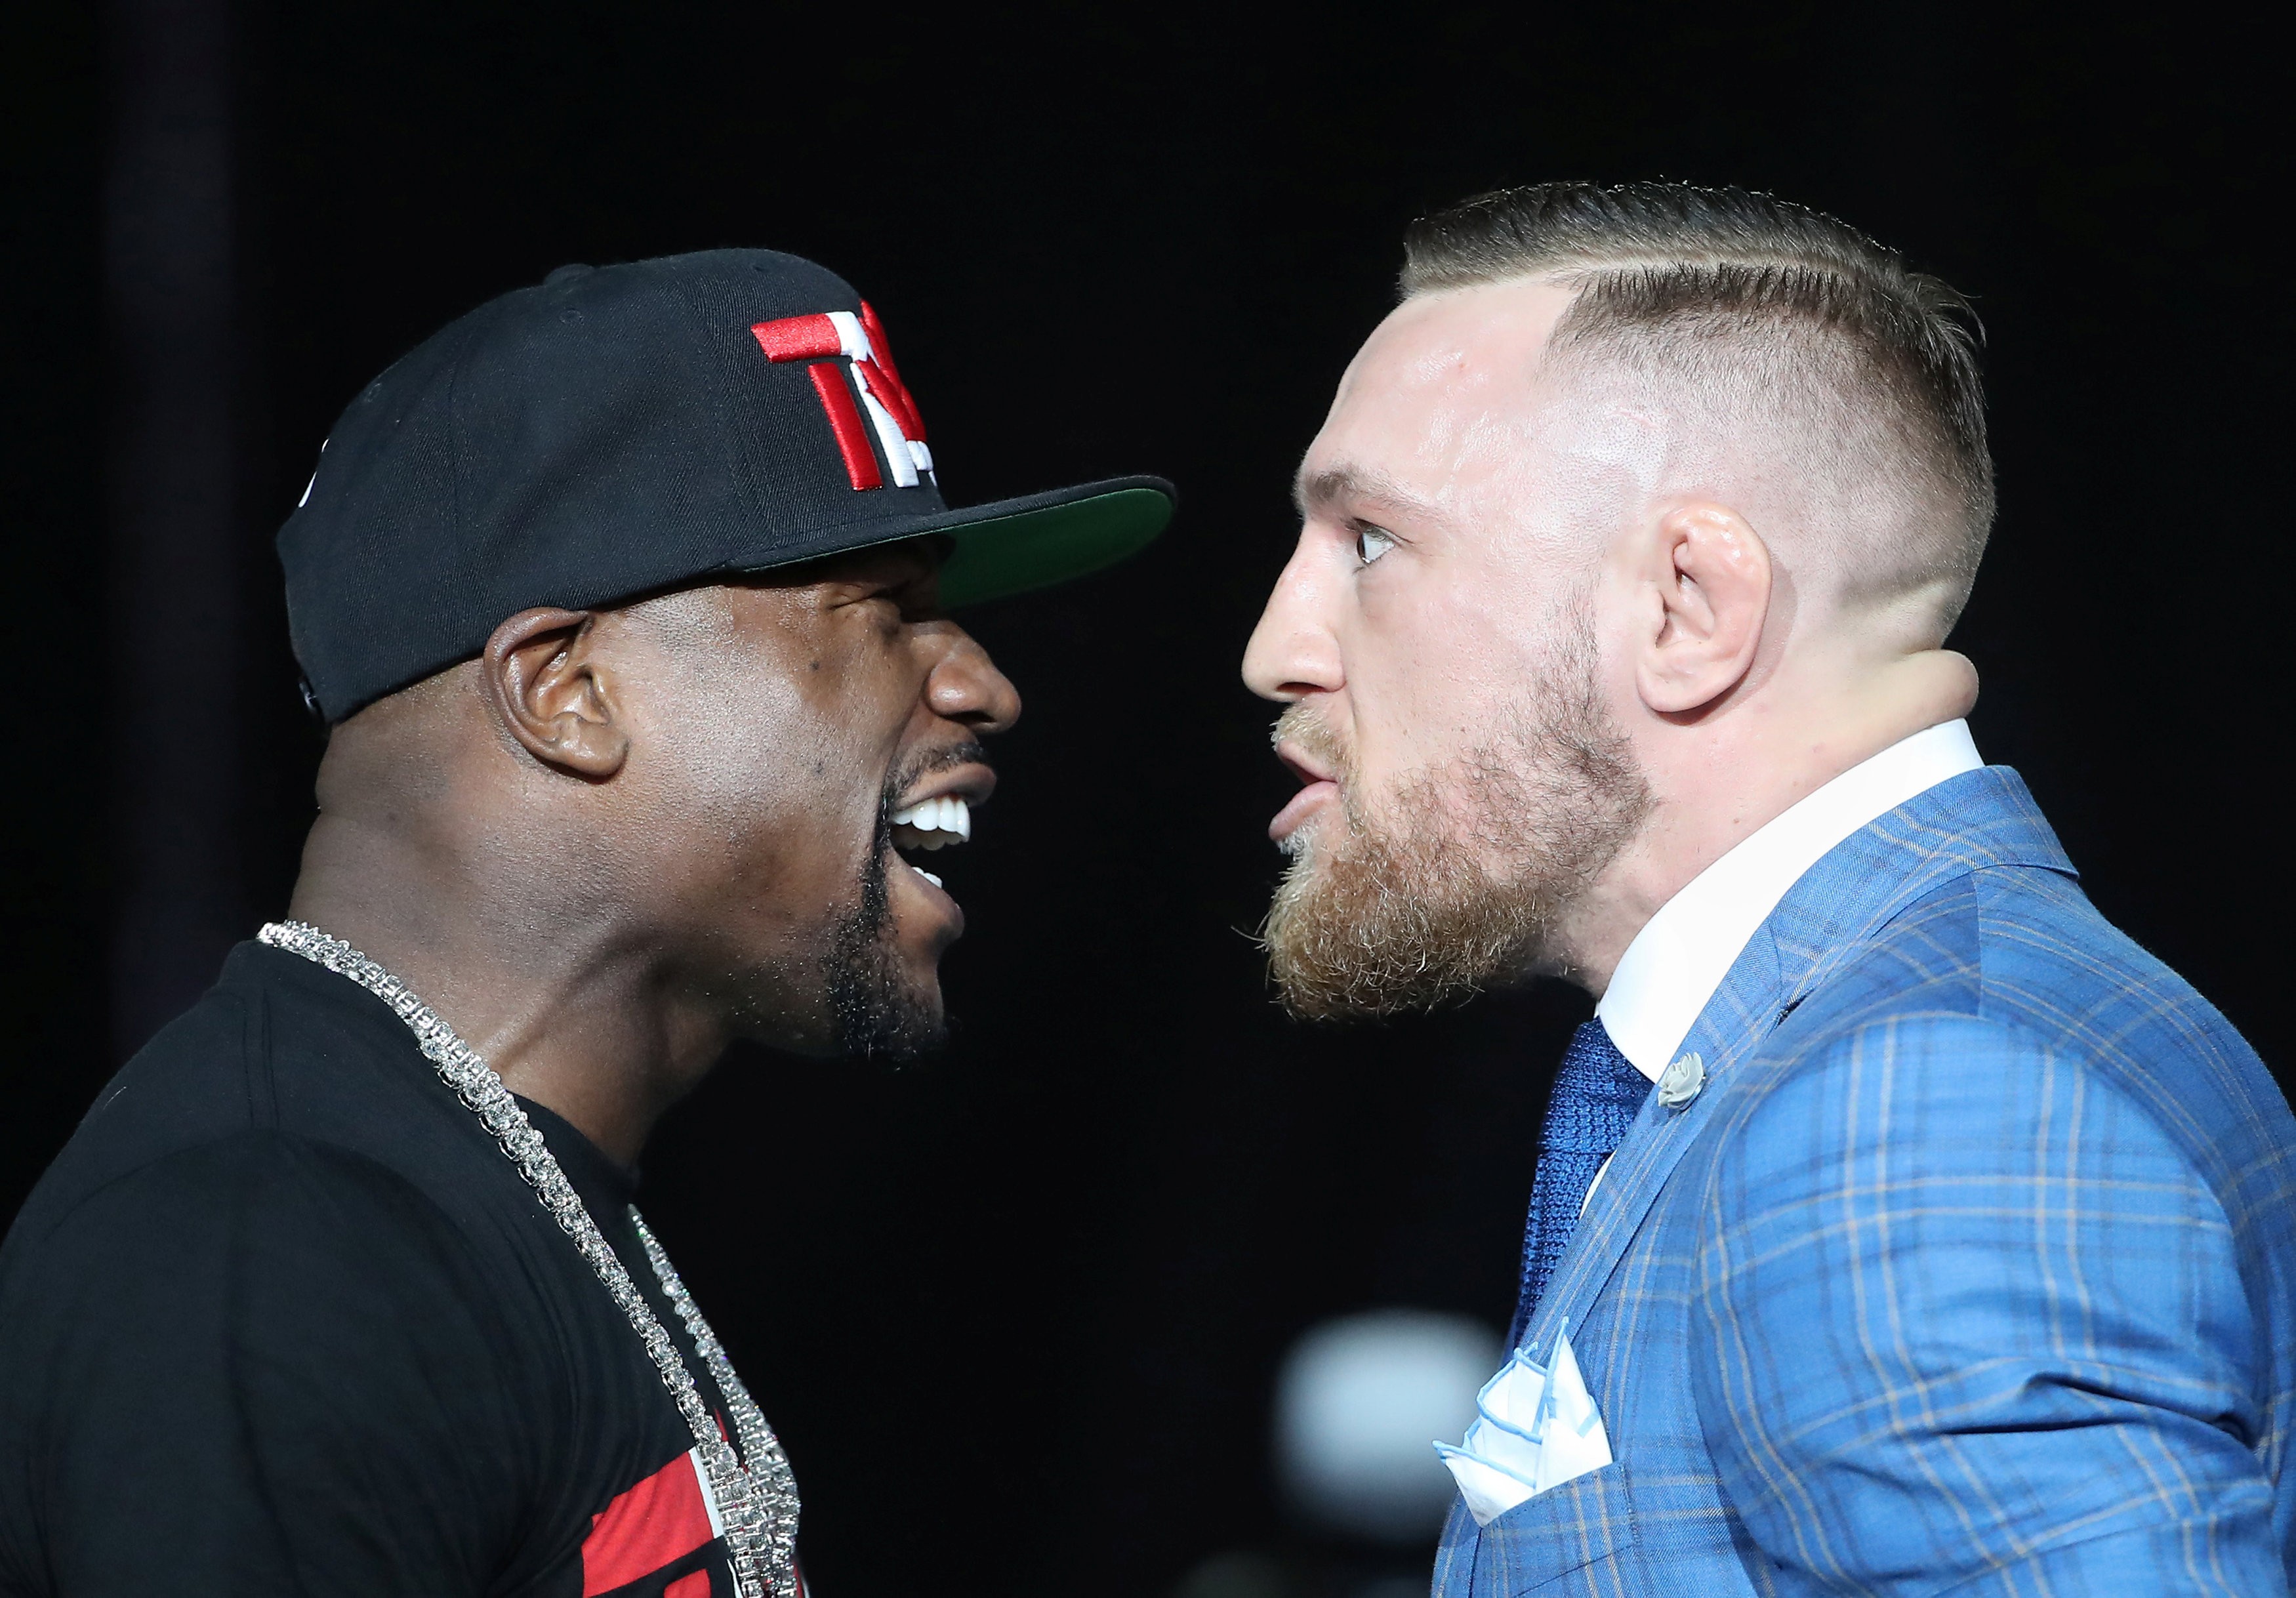 Floyd Mayweather and Conor McGregor stare each other down during their world tour press conference. Photo: USA Today